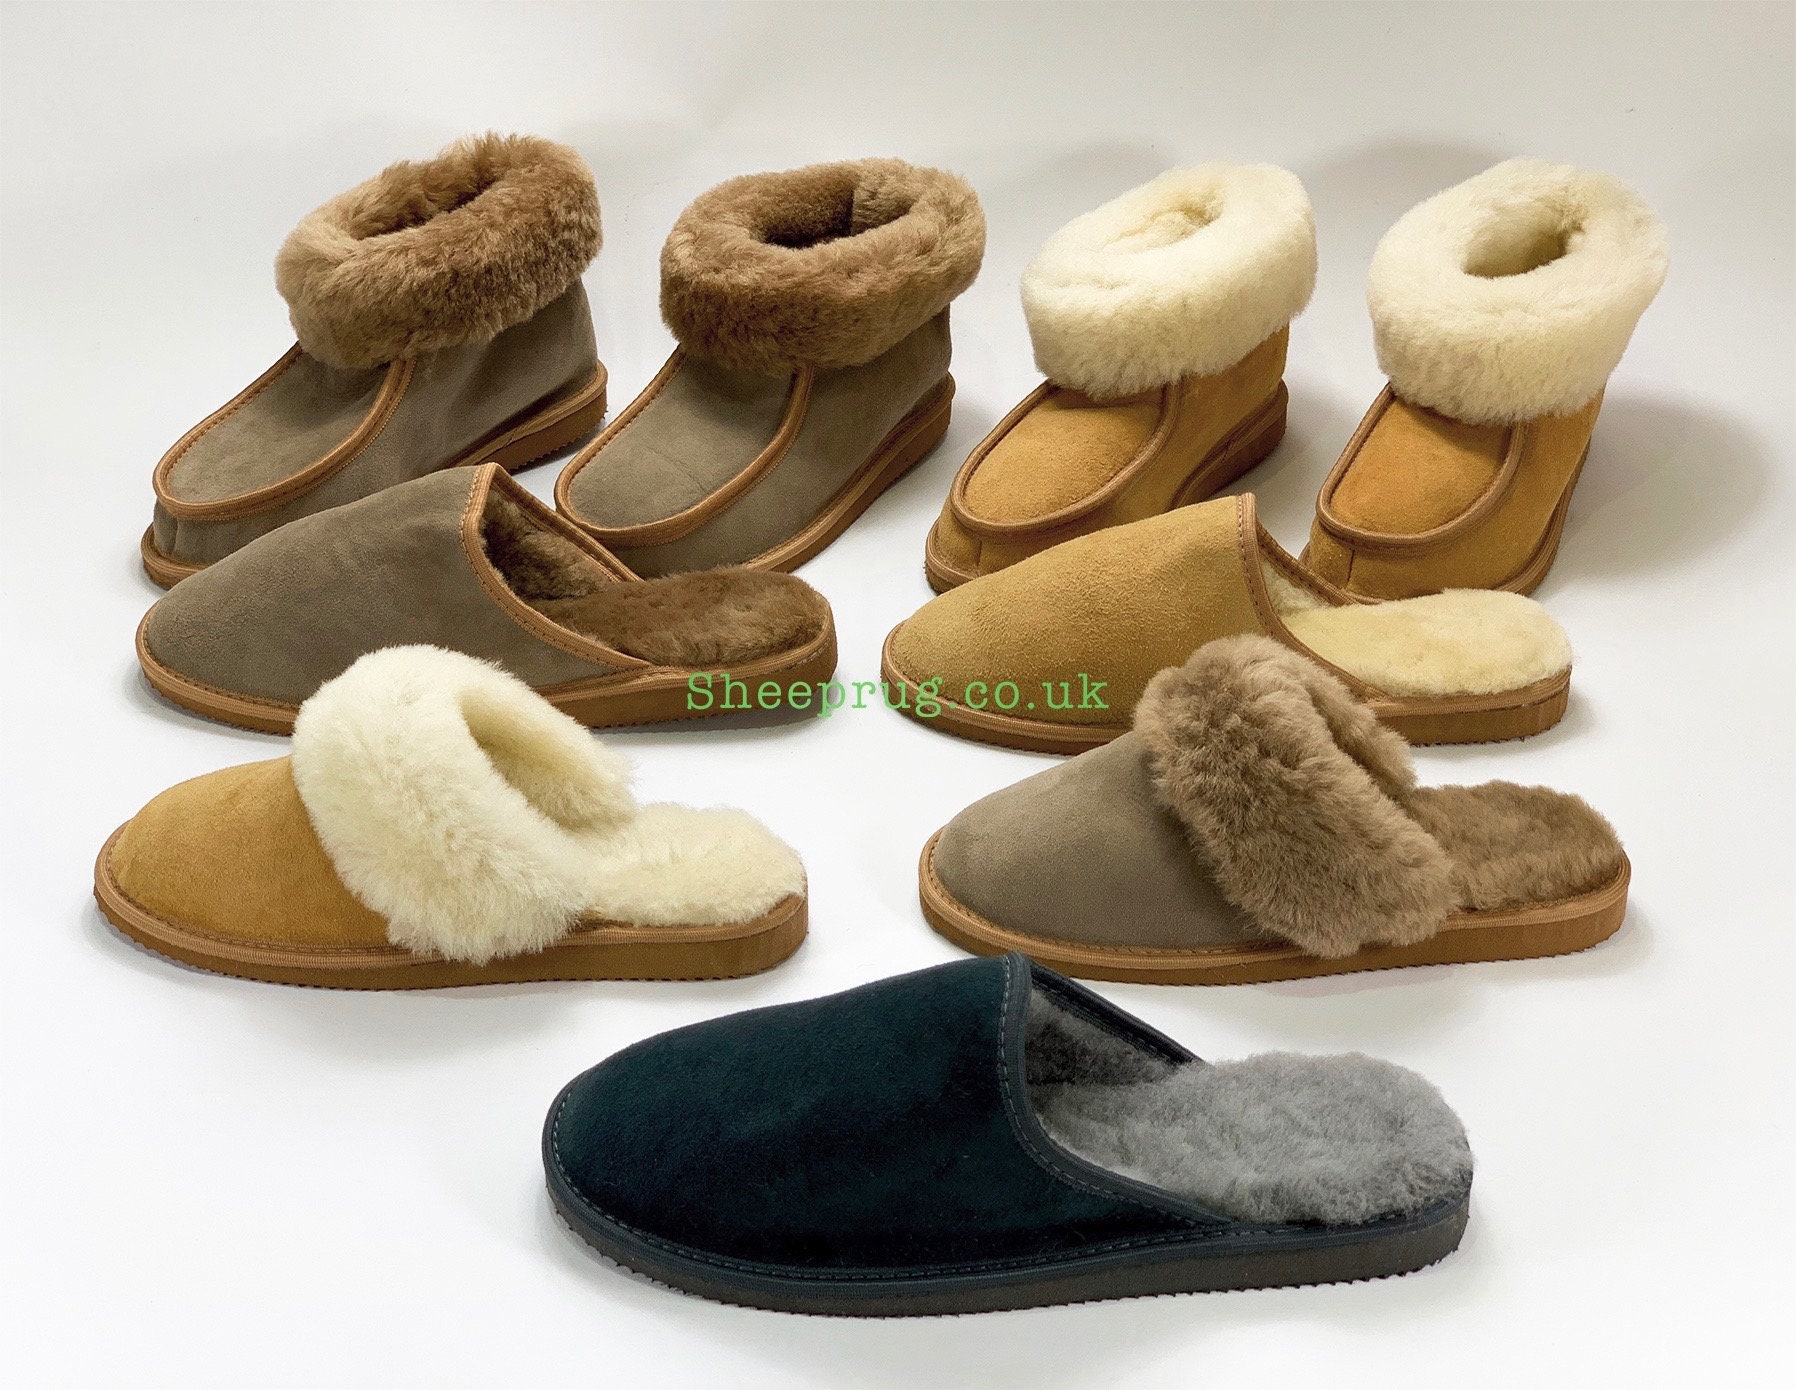 Sheepskin Slippers Leather Slippers Leather Handcraft